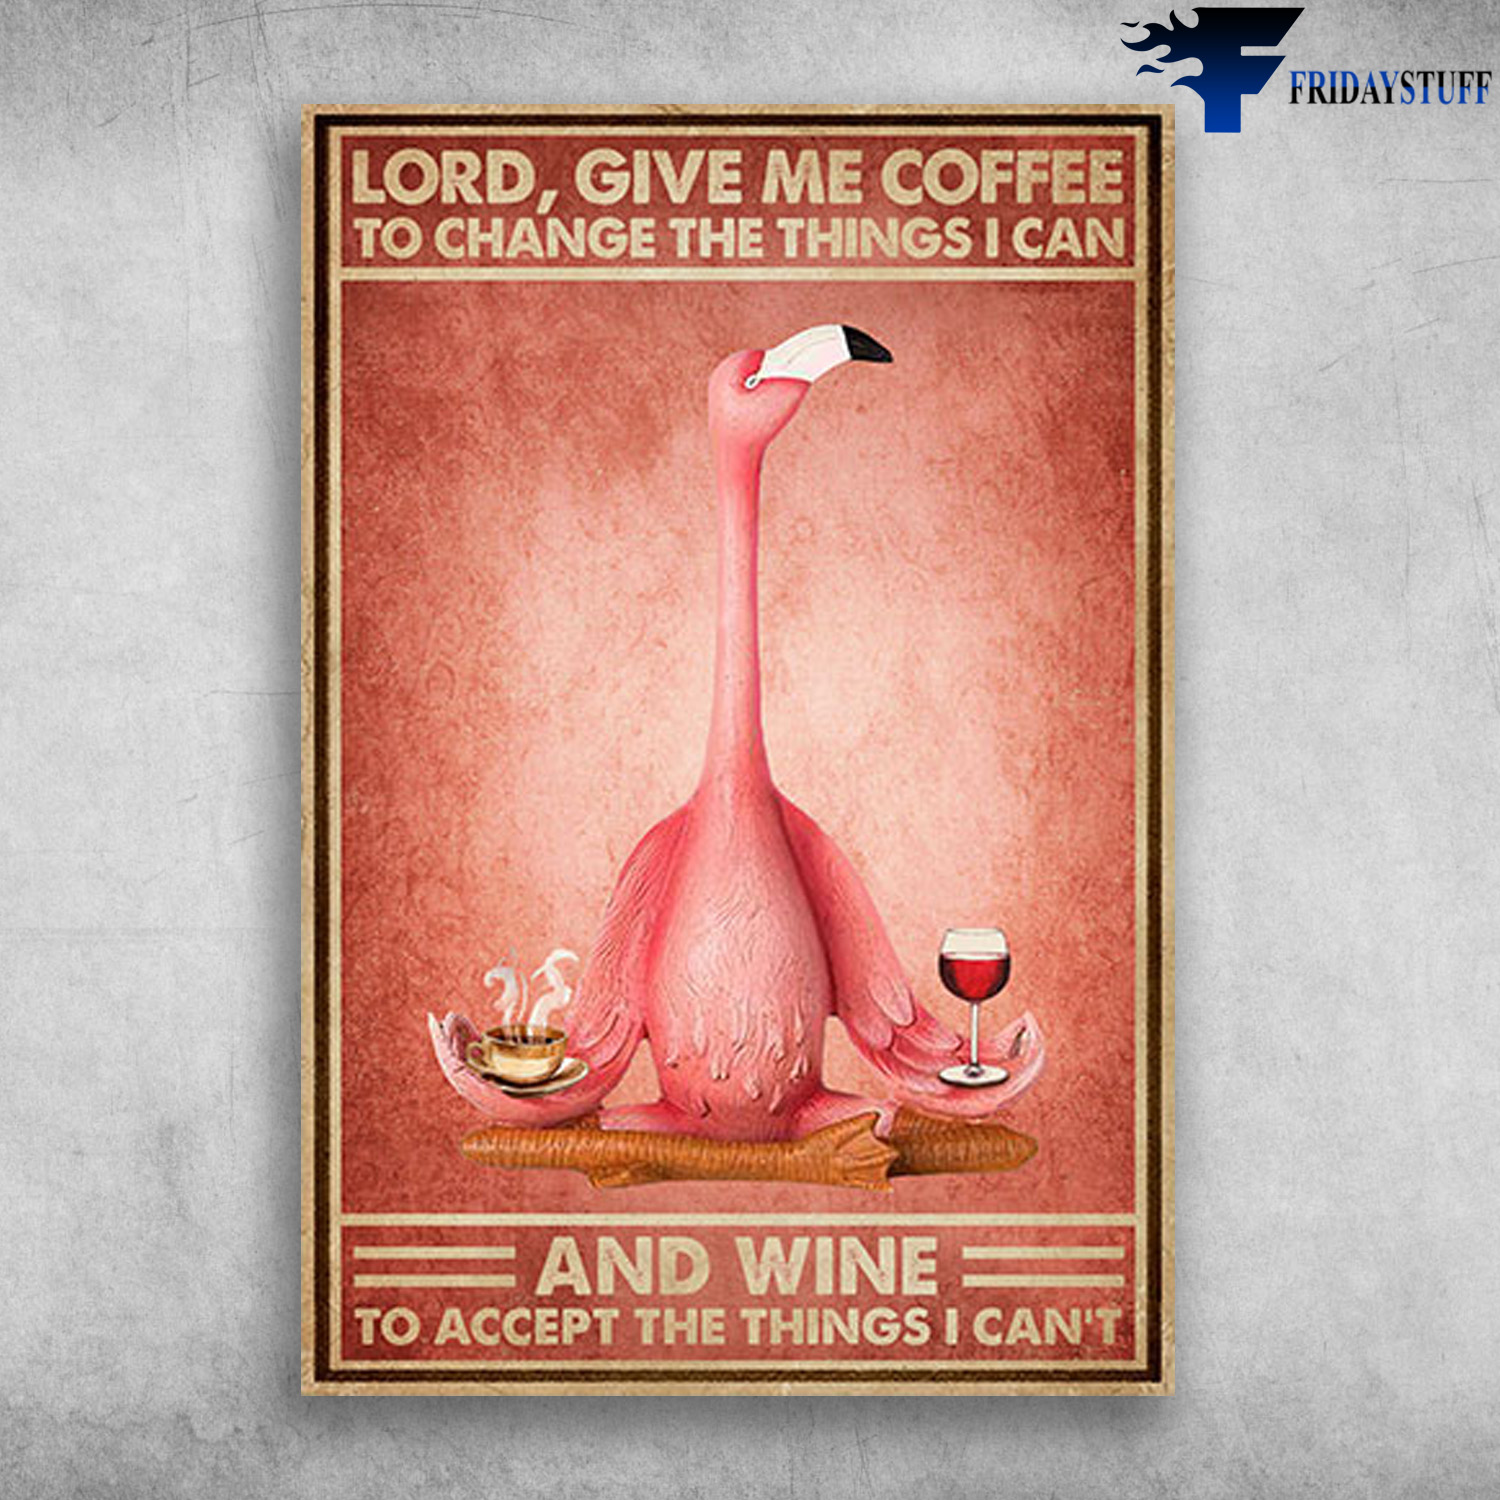 Flamingo Loves Coffee And Wine - Lord, Give Me Coffee, To Change The Things I Can, And Wine To Accept The Things I Can't